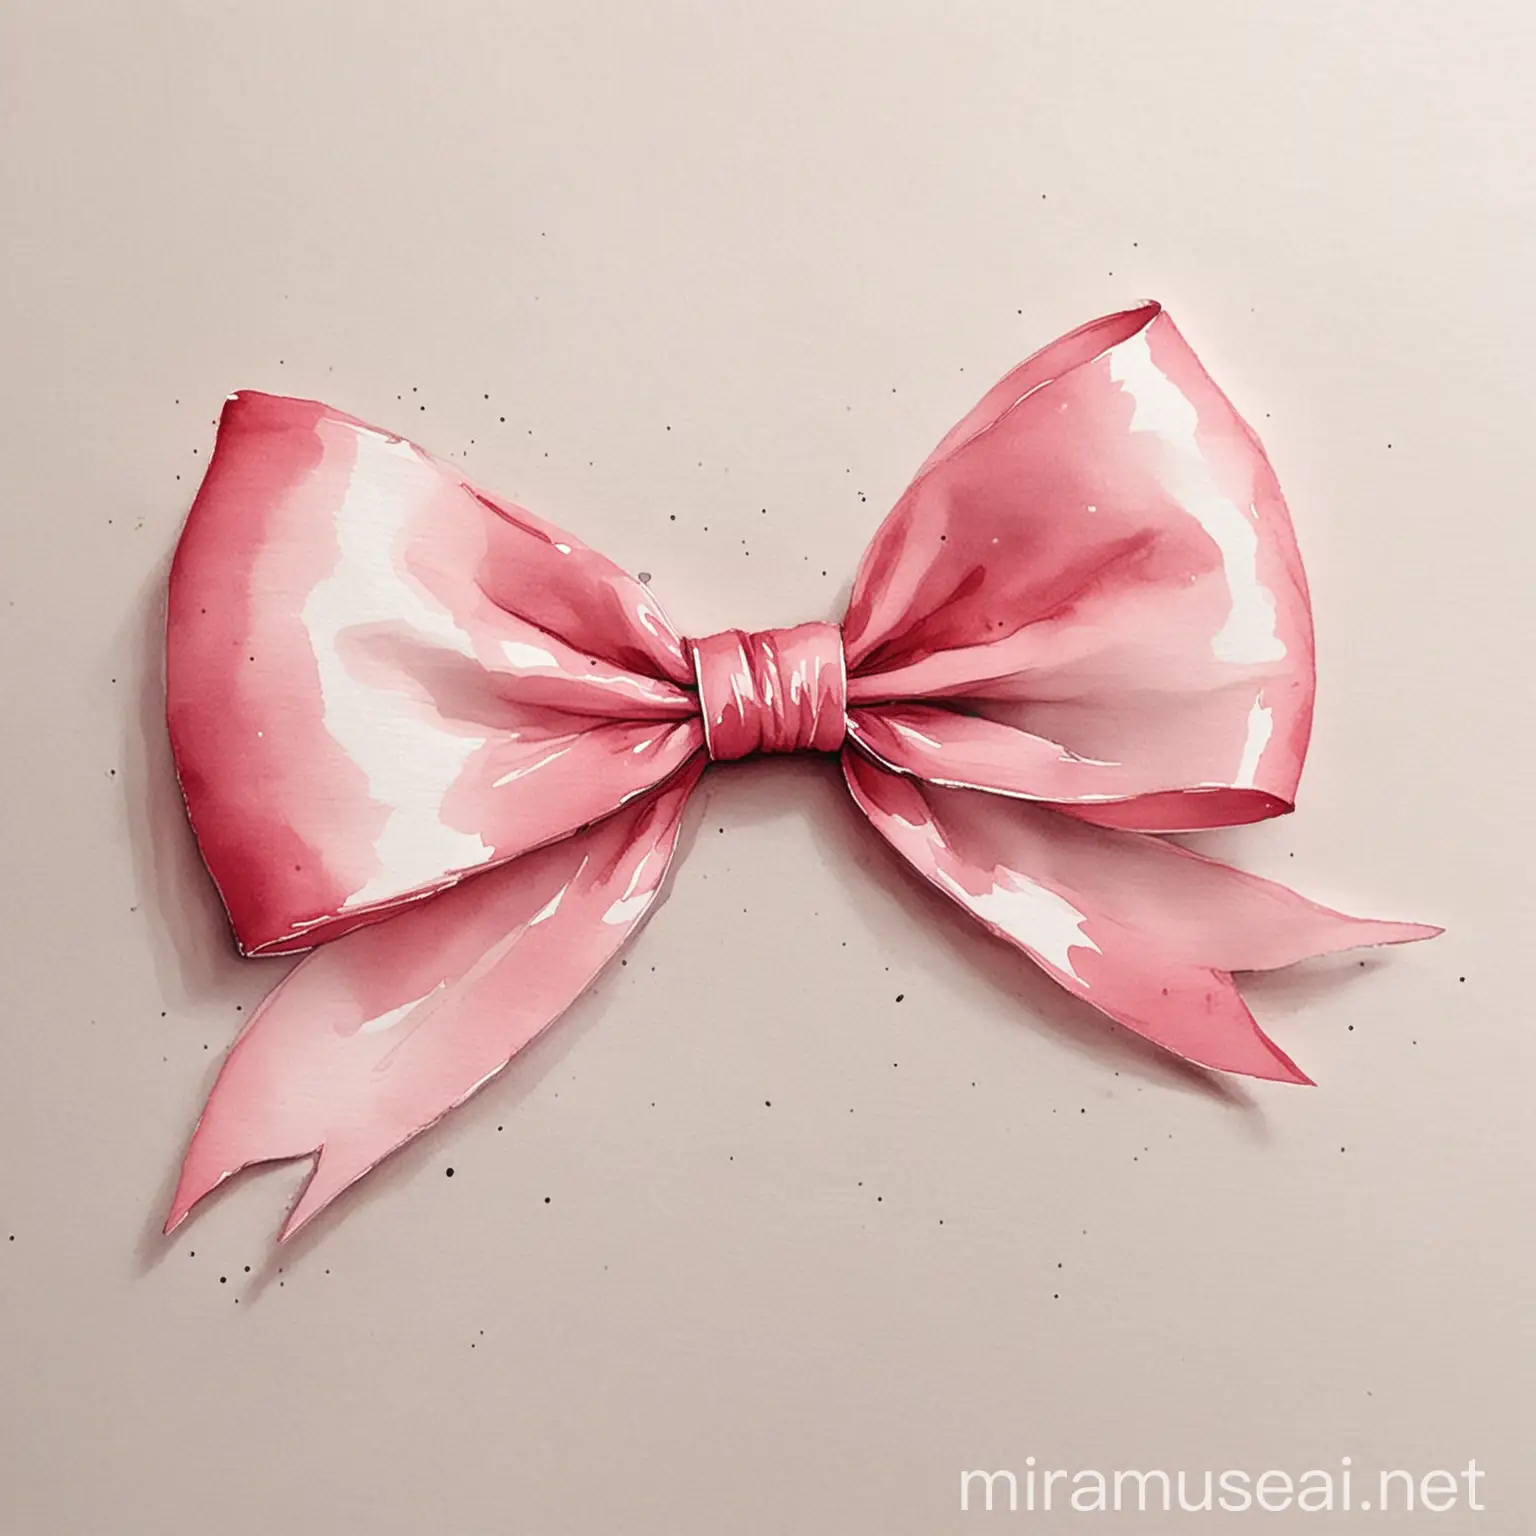 Elegant Pink Bow Watercolor with Flowing Ends